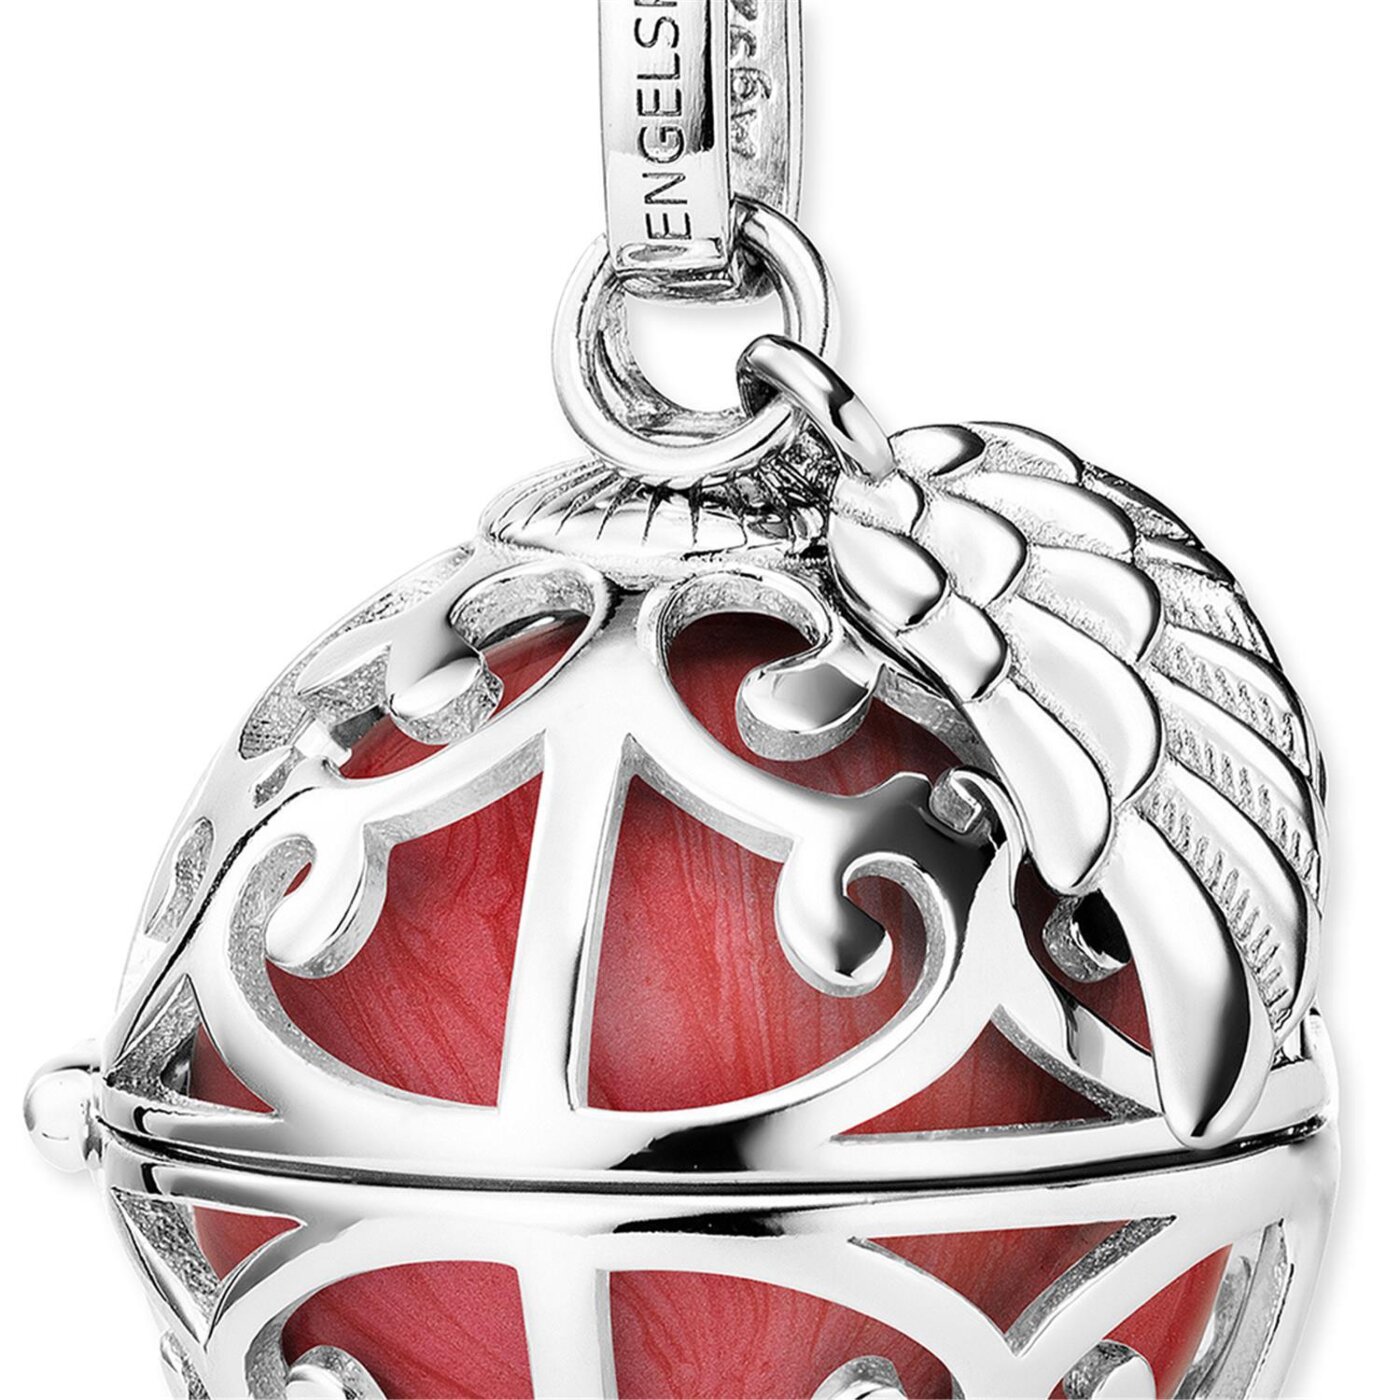 Angel caller sound ball pendant M ⌀19.5mm 925 silver mother-of-pearl red